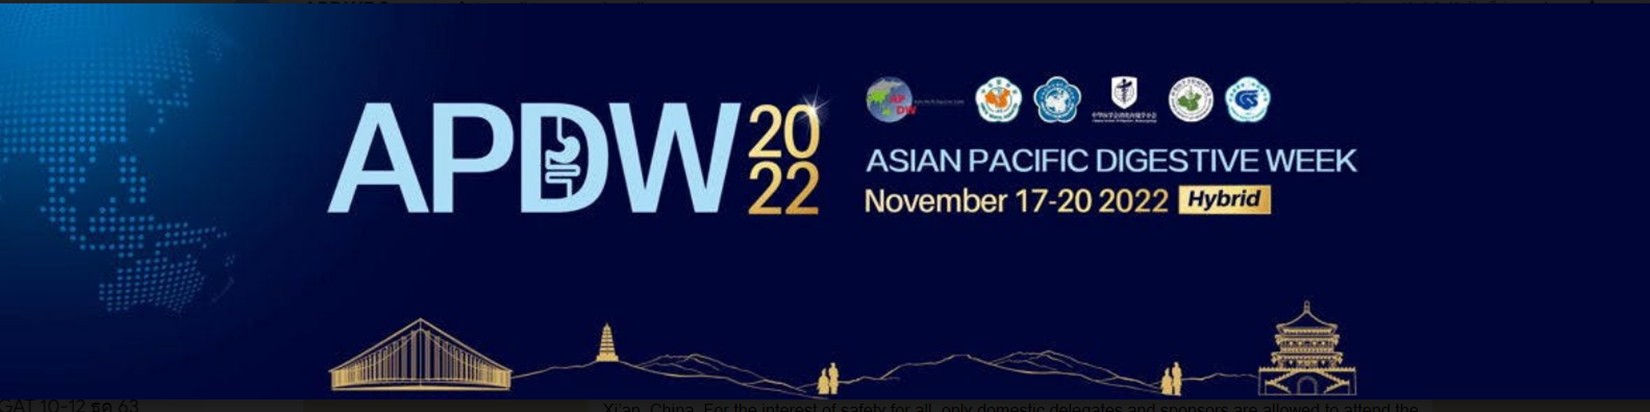 APDW2022 on November 17-20, 2022 in Xi’an, China.